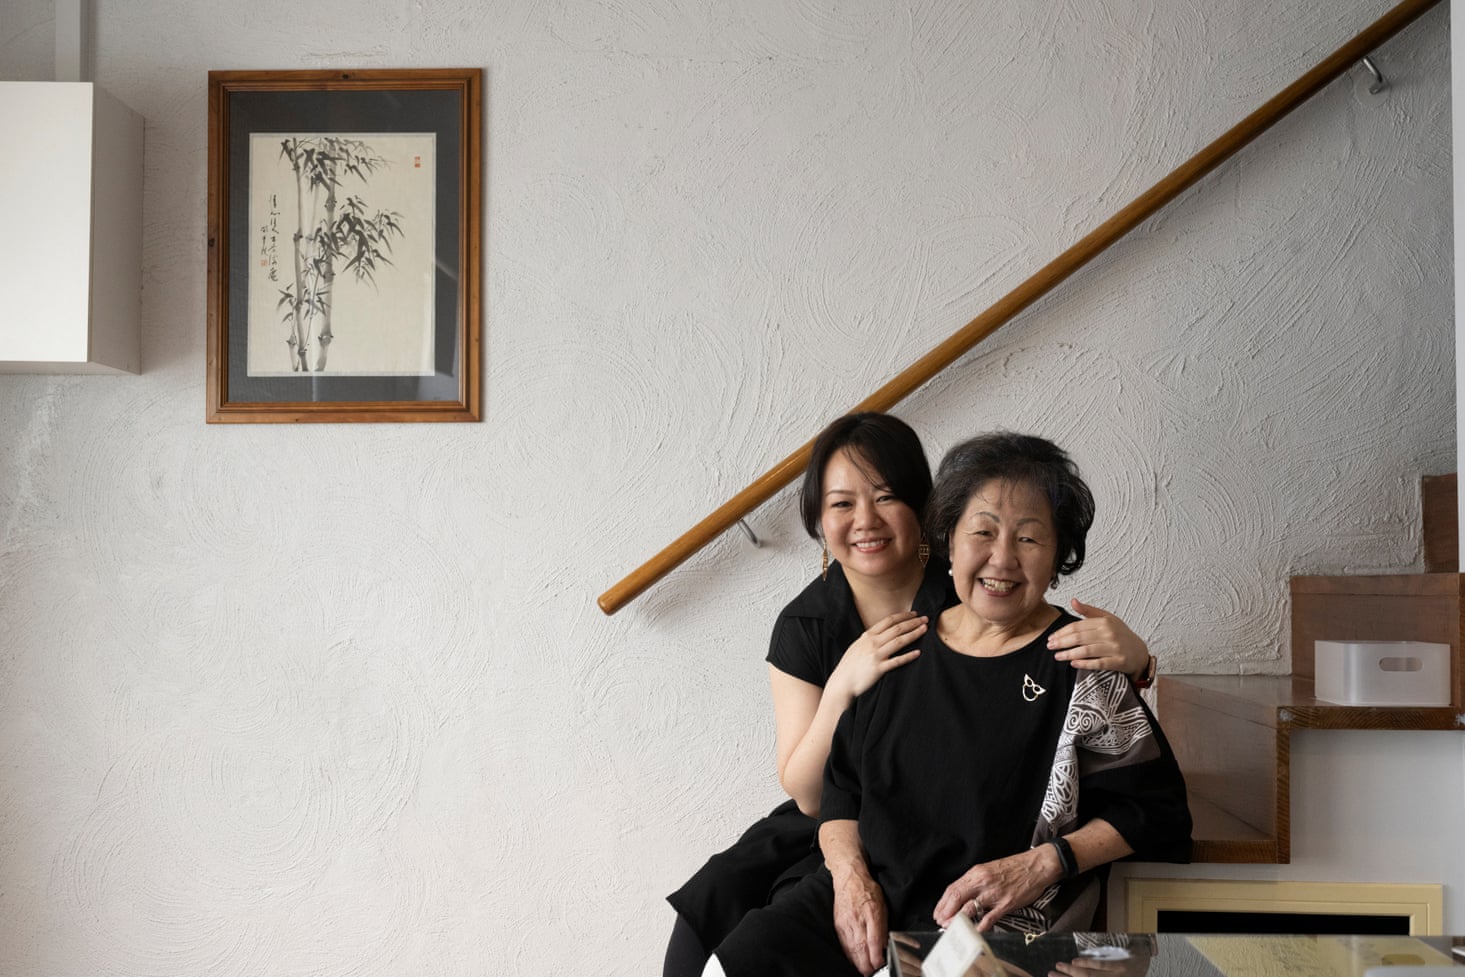 Hiromi Masuoka and her daughter Mocca pictured at the Ofuroya Japanese Bath House in Collingwood.